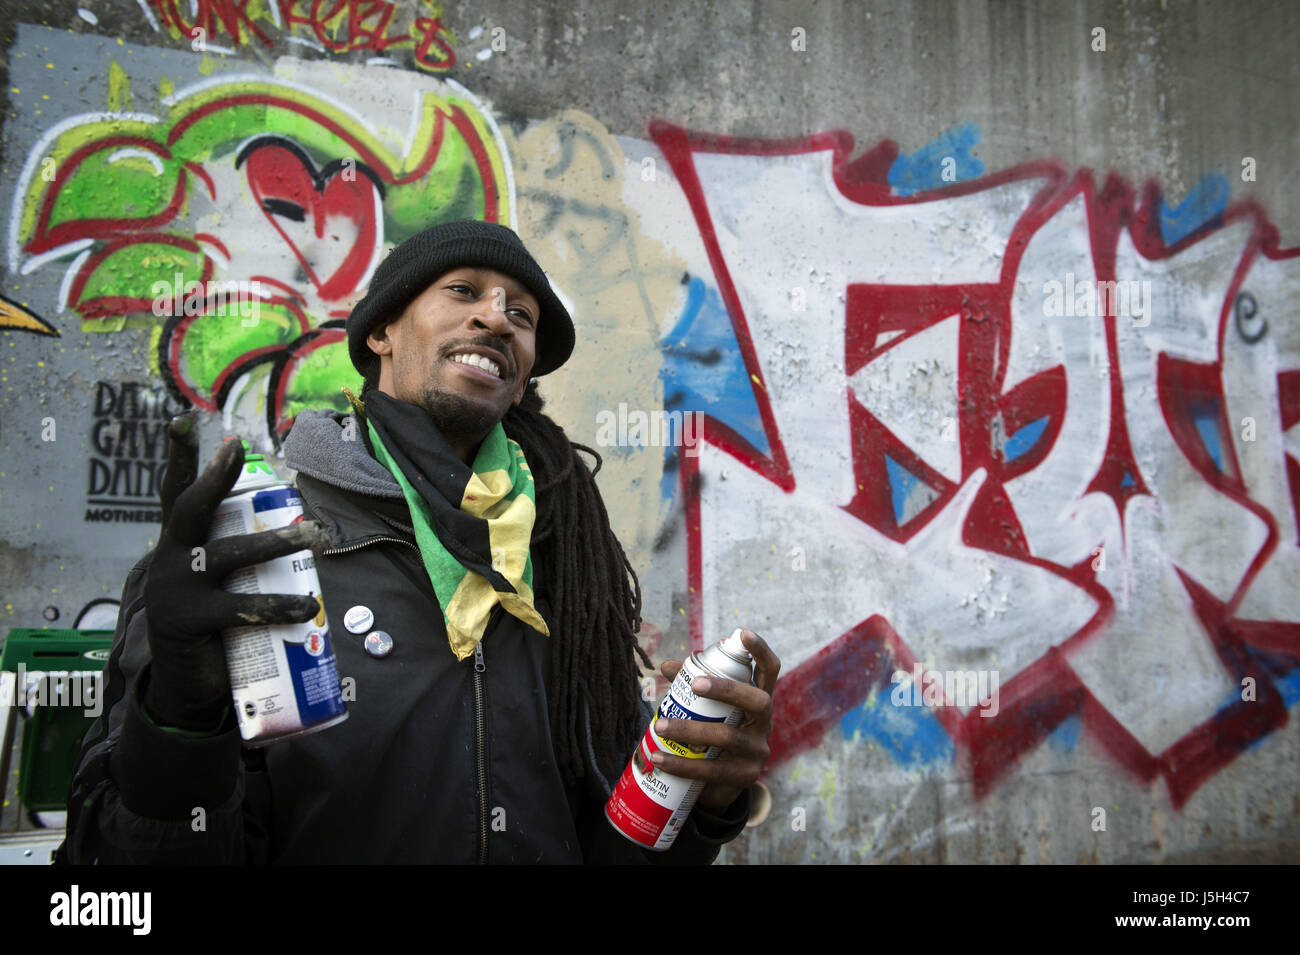 January 27, 2017 - Atlanta, GA - An urban artist who uses the name 'Dap' tags a large retaining wall with his creative graffiti in an industrial area of Atlanta, using nothing but cans of spray paint. (Credit Image: © Robin Rayne Nelson via ZUMA Wire) Stock Photo